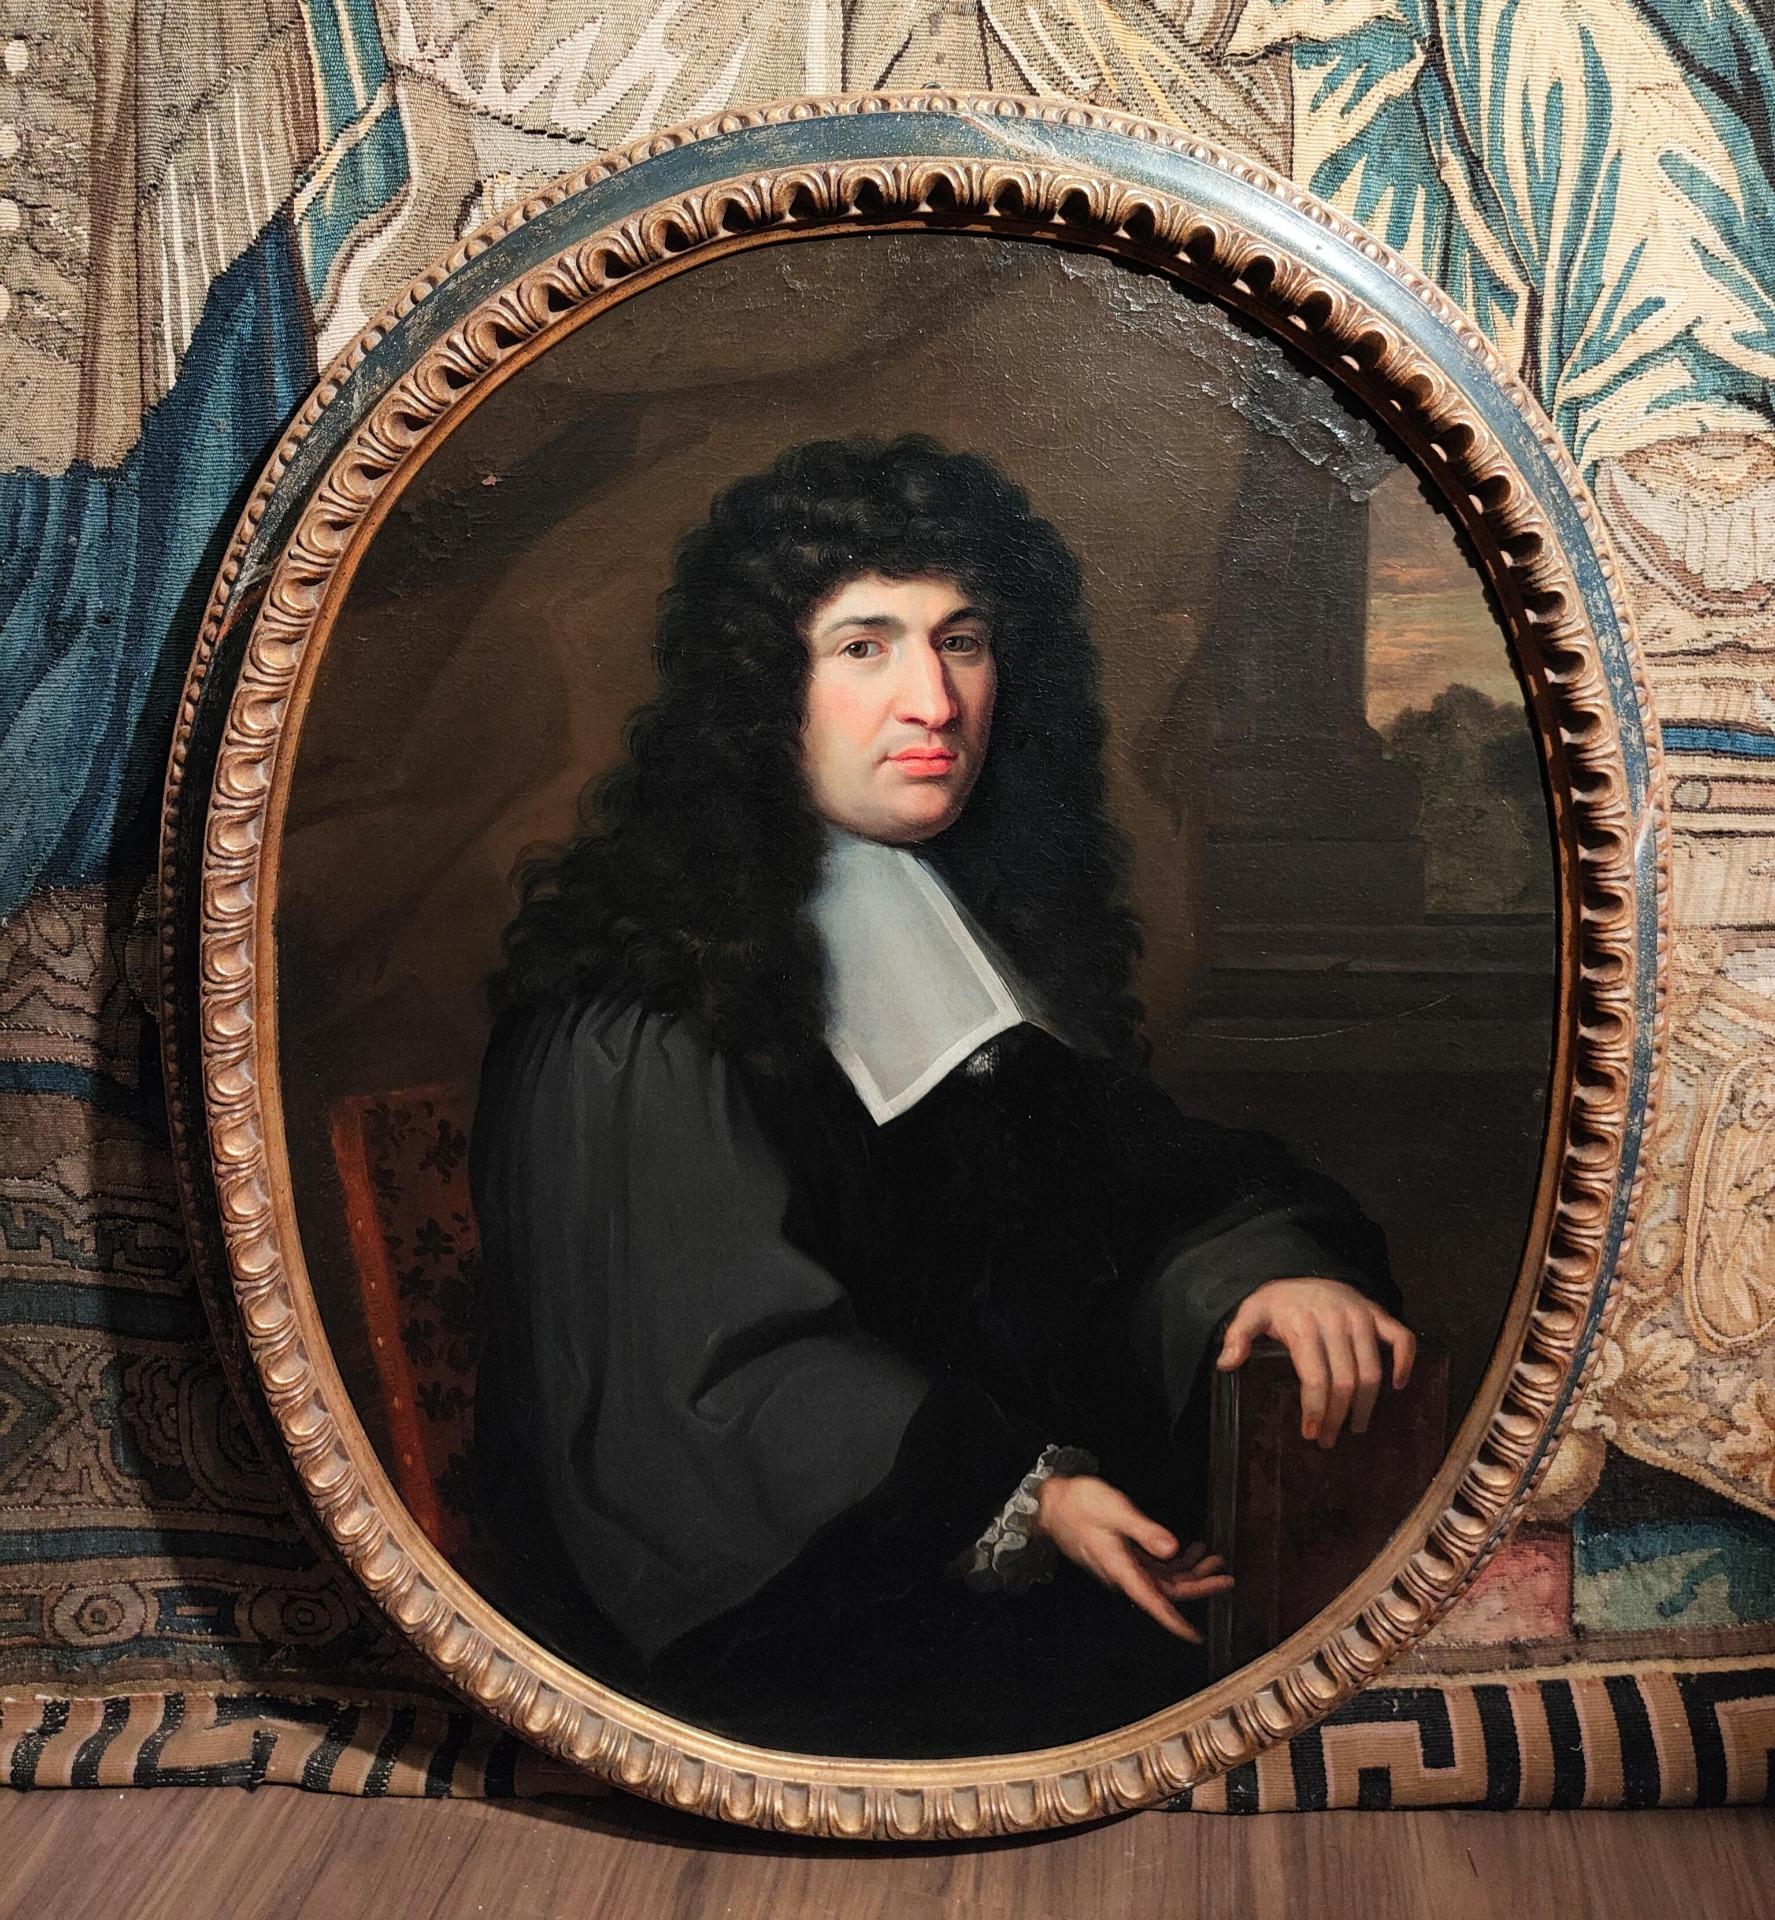 Beautiful Painting depicting portrait of Nobleman/Gentleman with wig. 
Painting of remarkable pictorial quality and scenic impact.  
The depiction of the man is rich in detail and perfectly embodies the noble figures of the time. 
The tones in